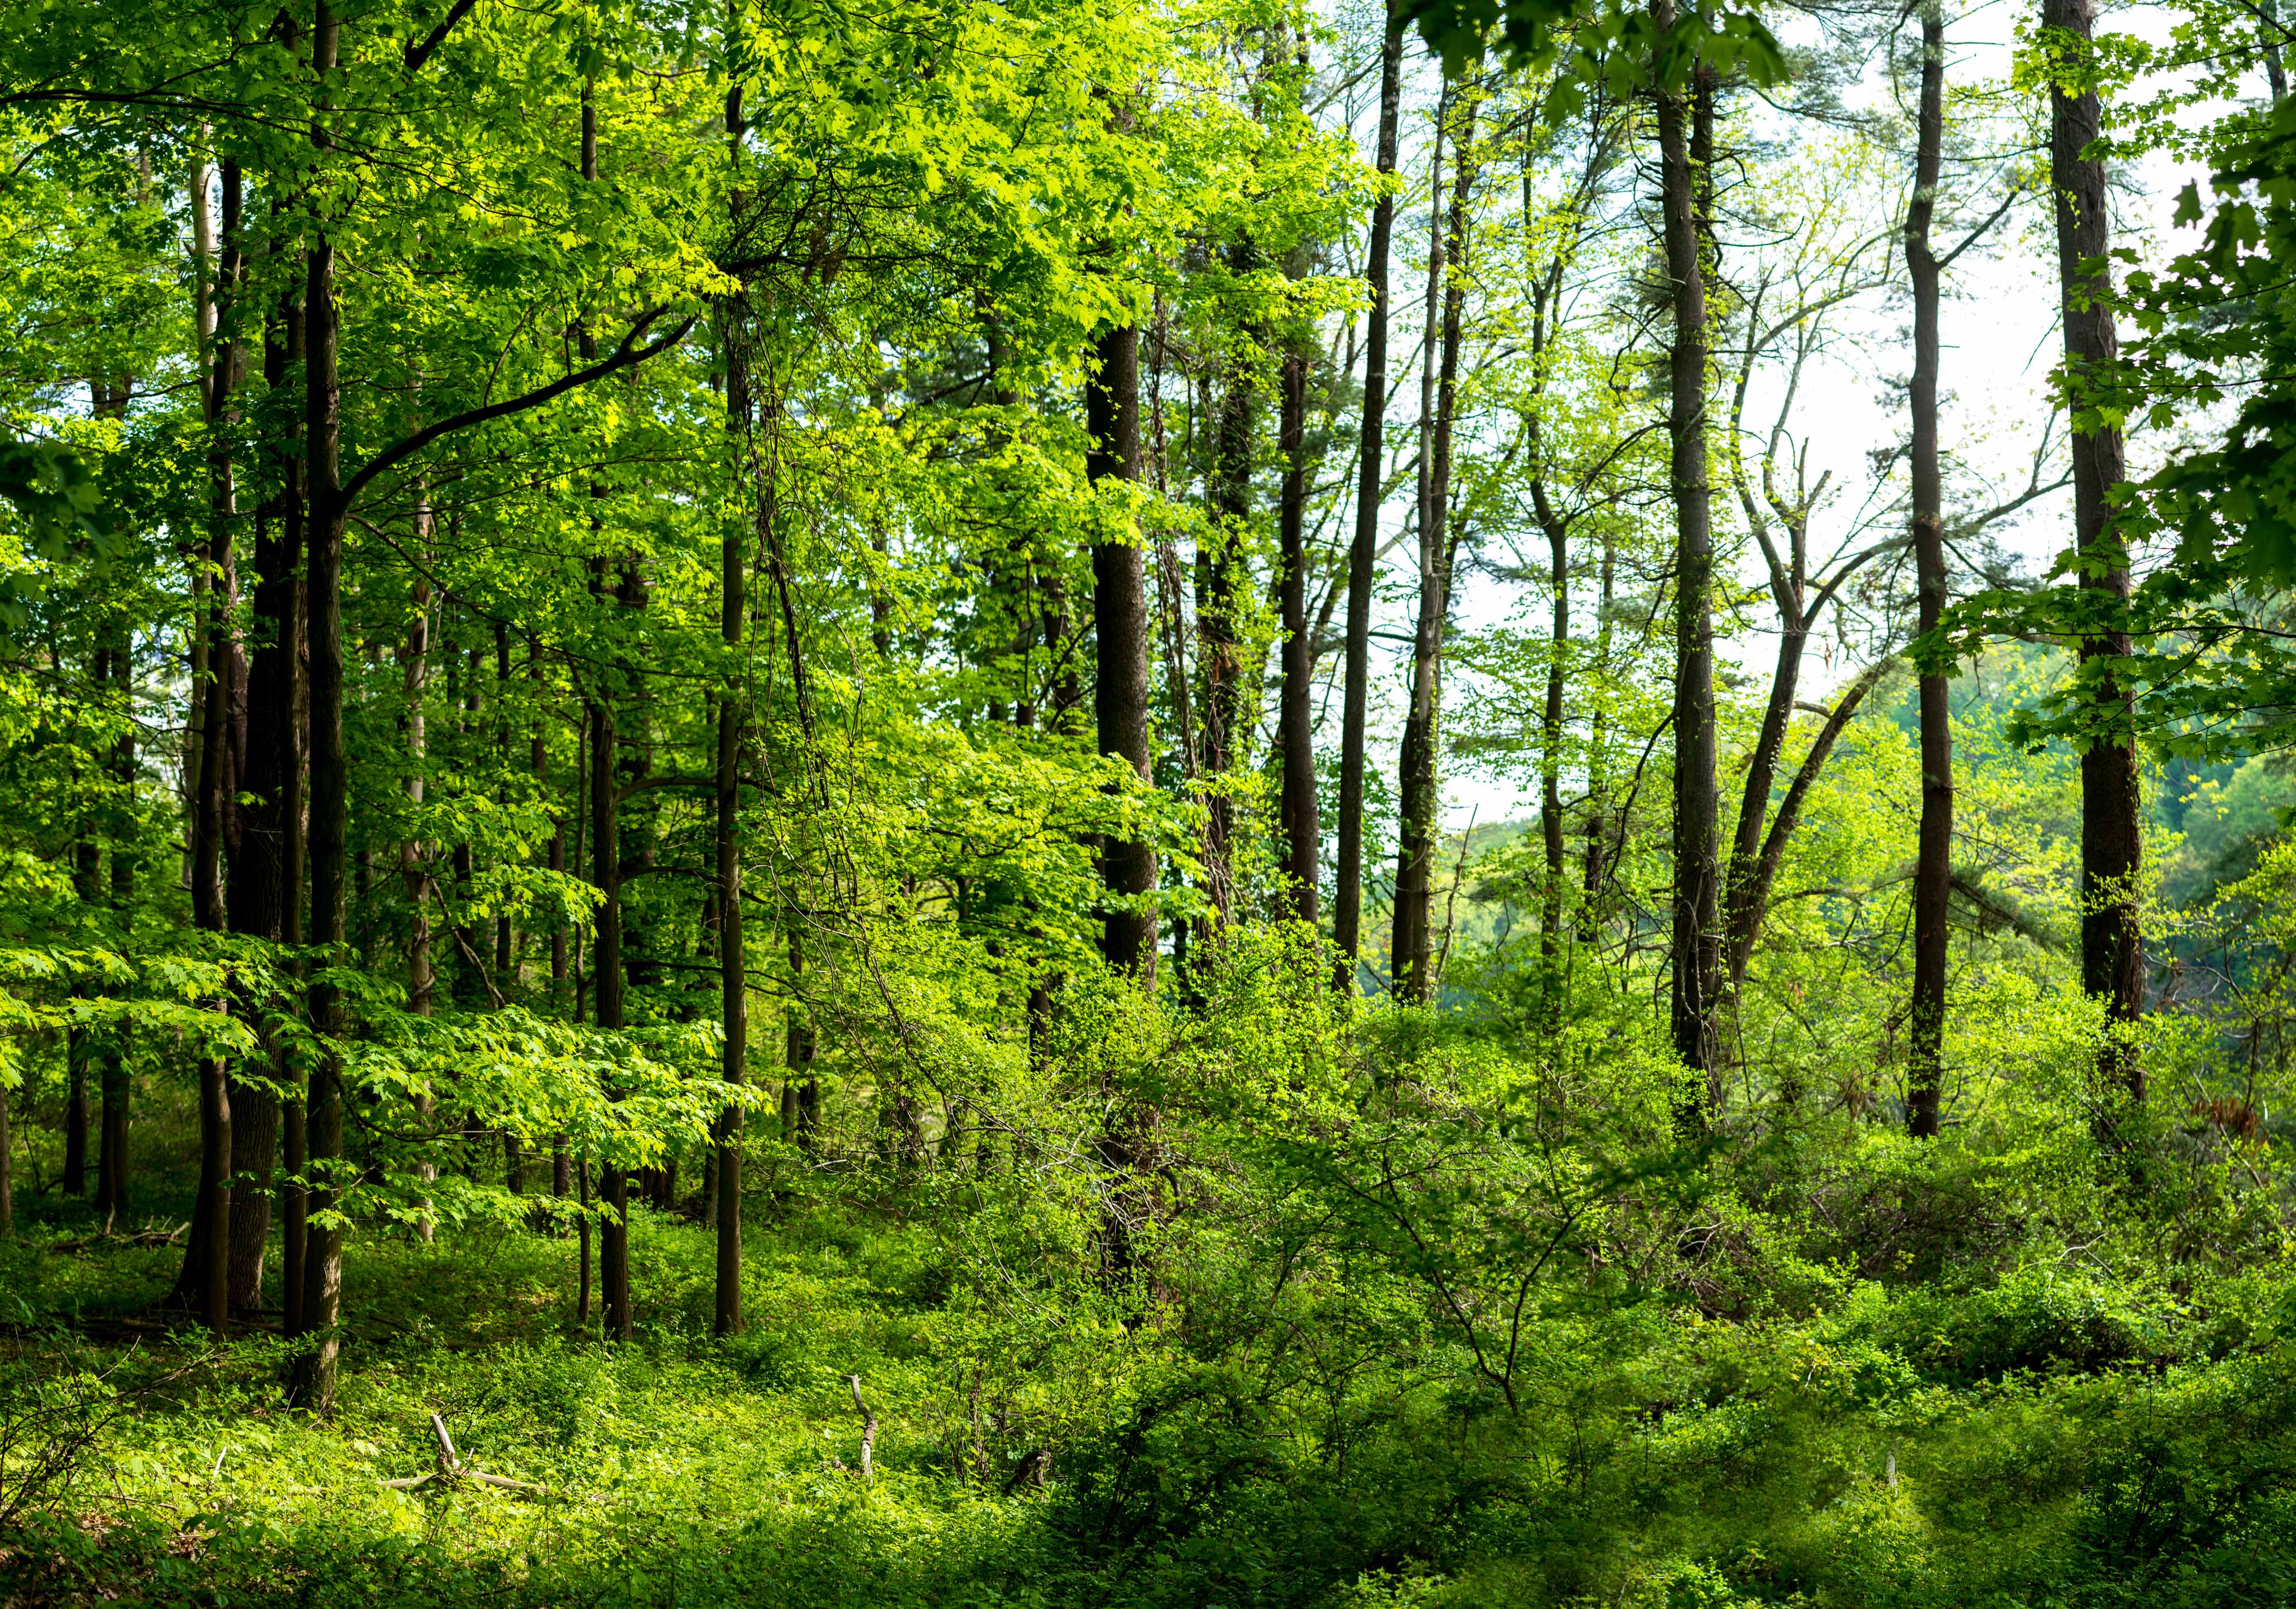 The sun shines through on a healthy, dense, green forest.